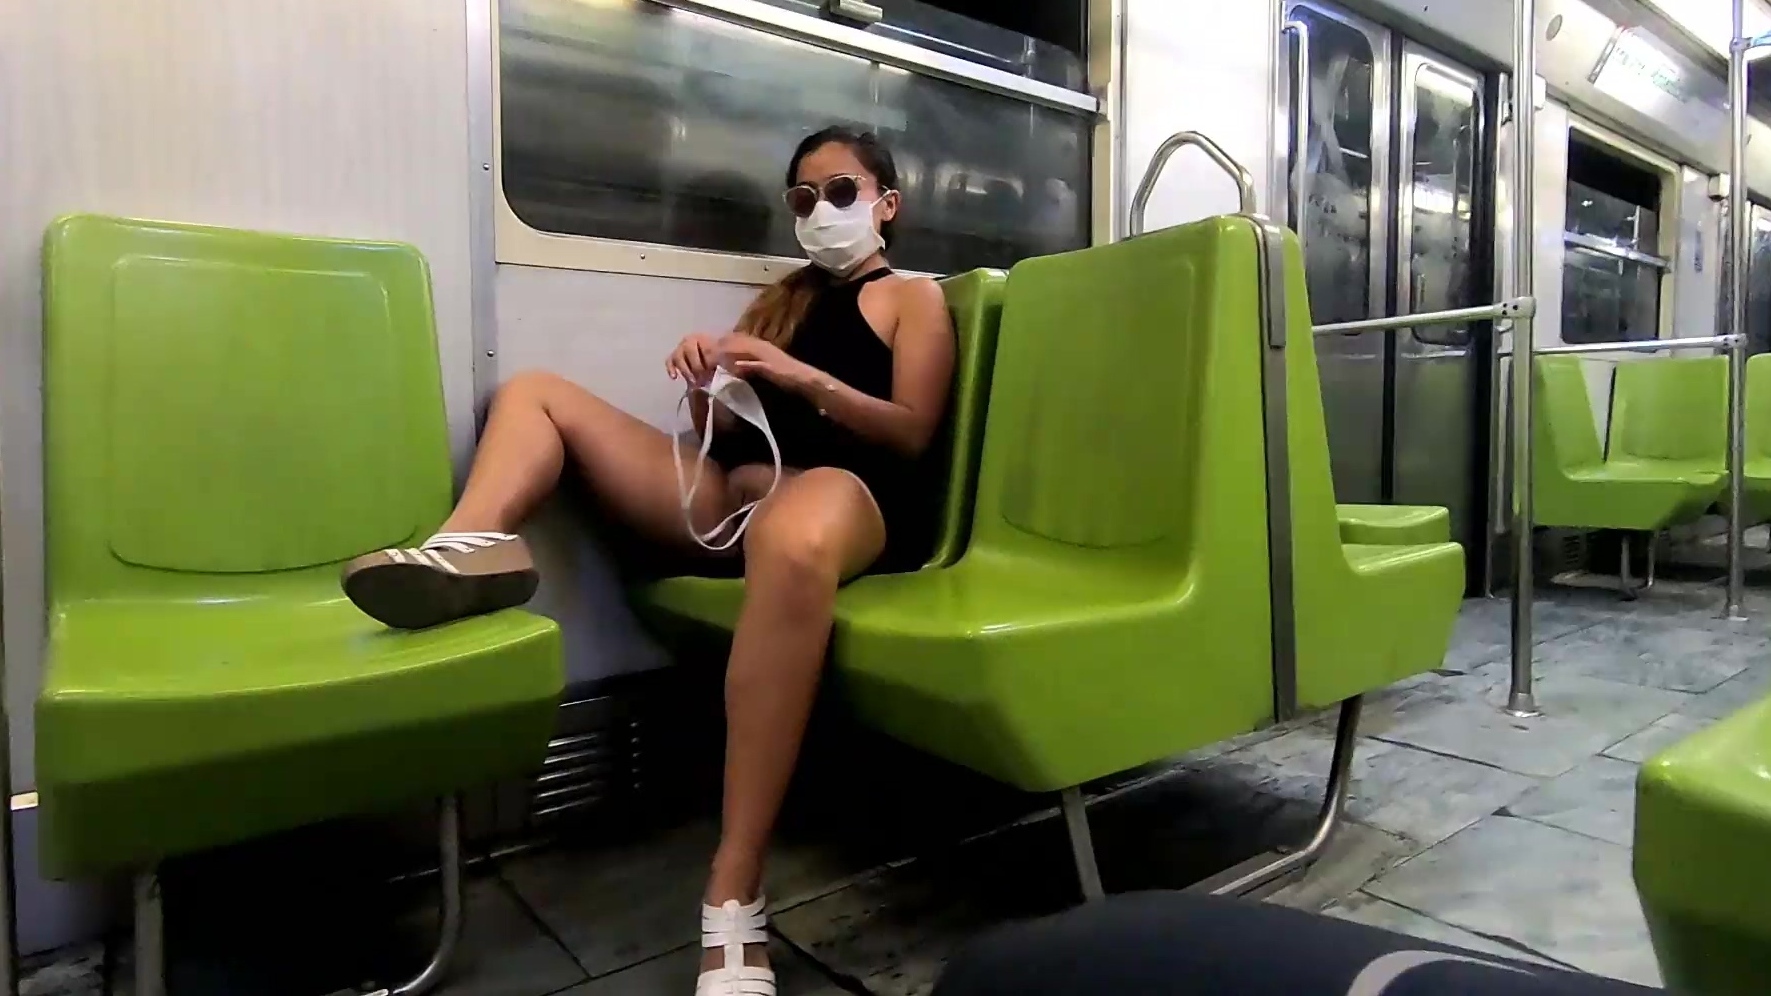 Amateur masked girl flashing her pussy in City Subway picture